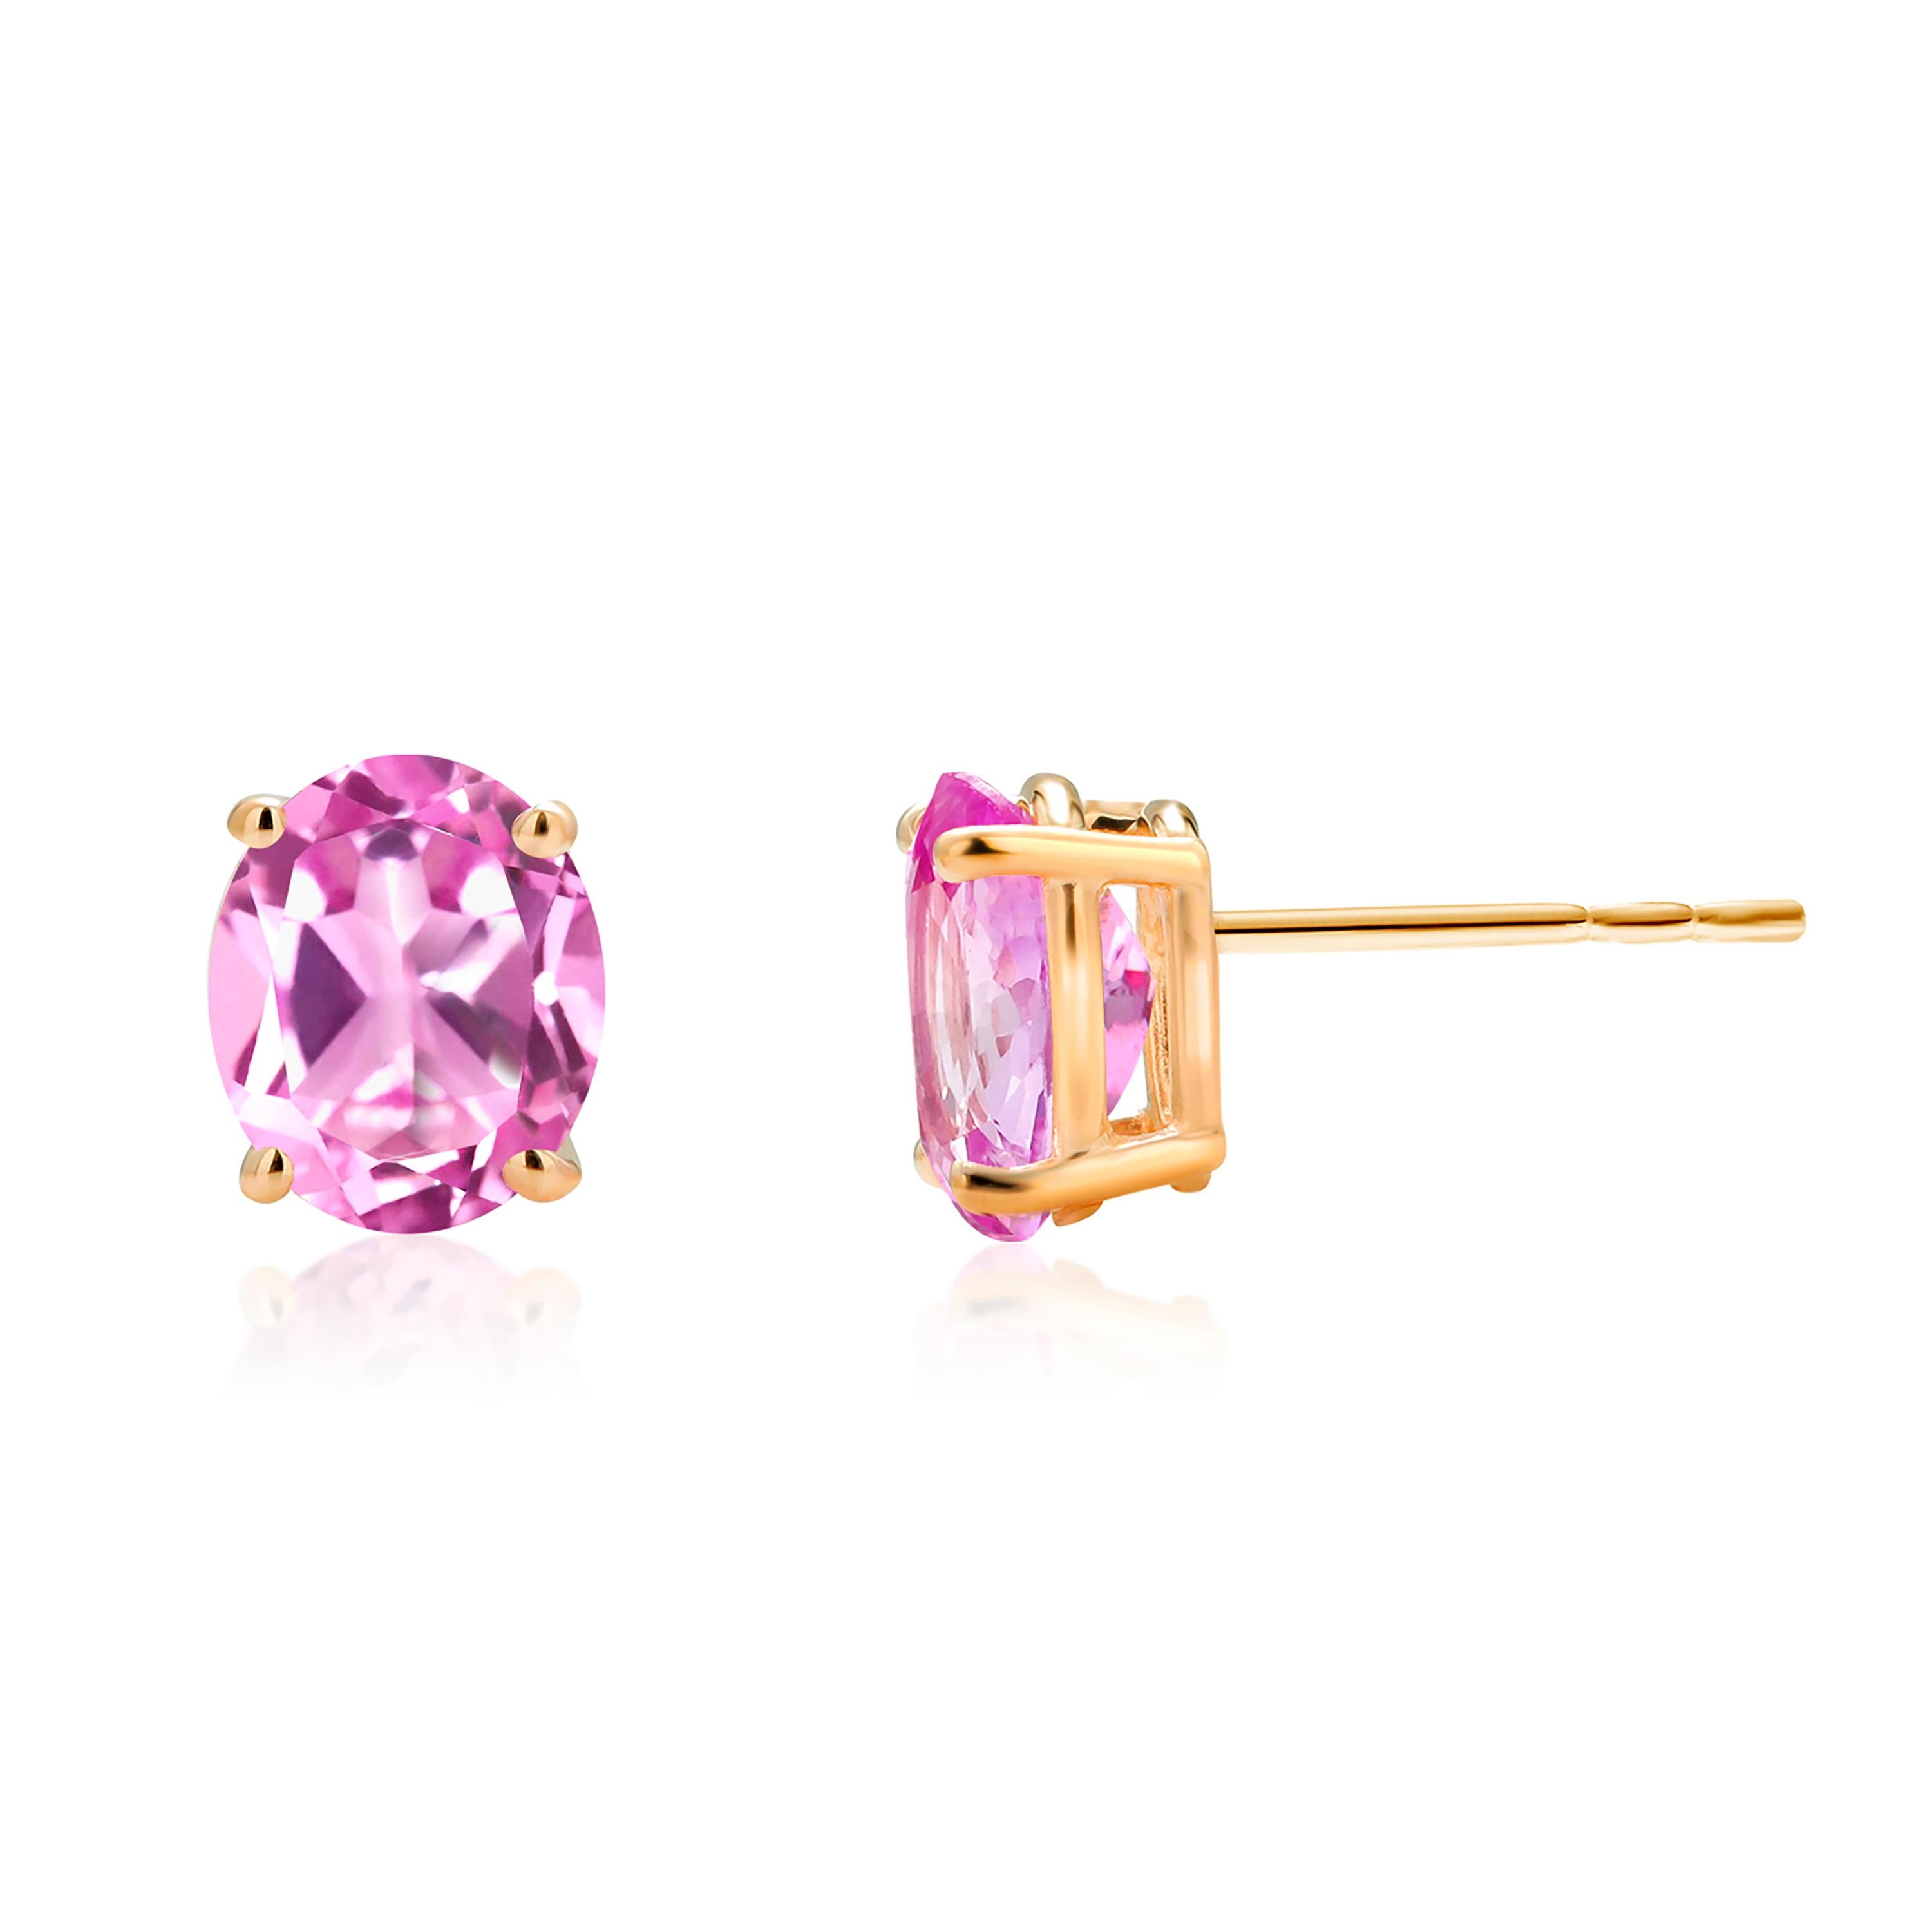 Oval Shaped Mini Ceylon Pink Sapphires Set in Yellow Gold Stud Earrings In New Condition For Sale In New York, NY